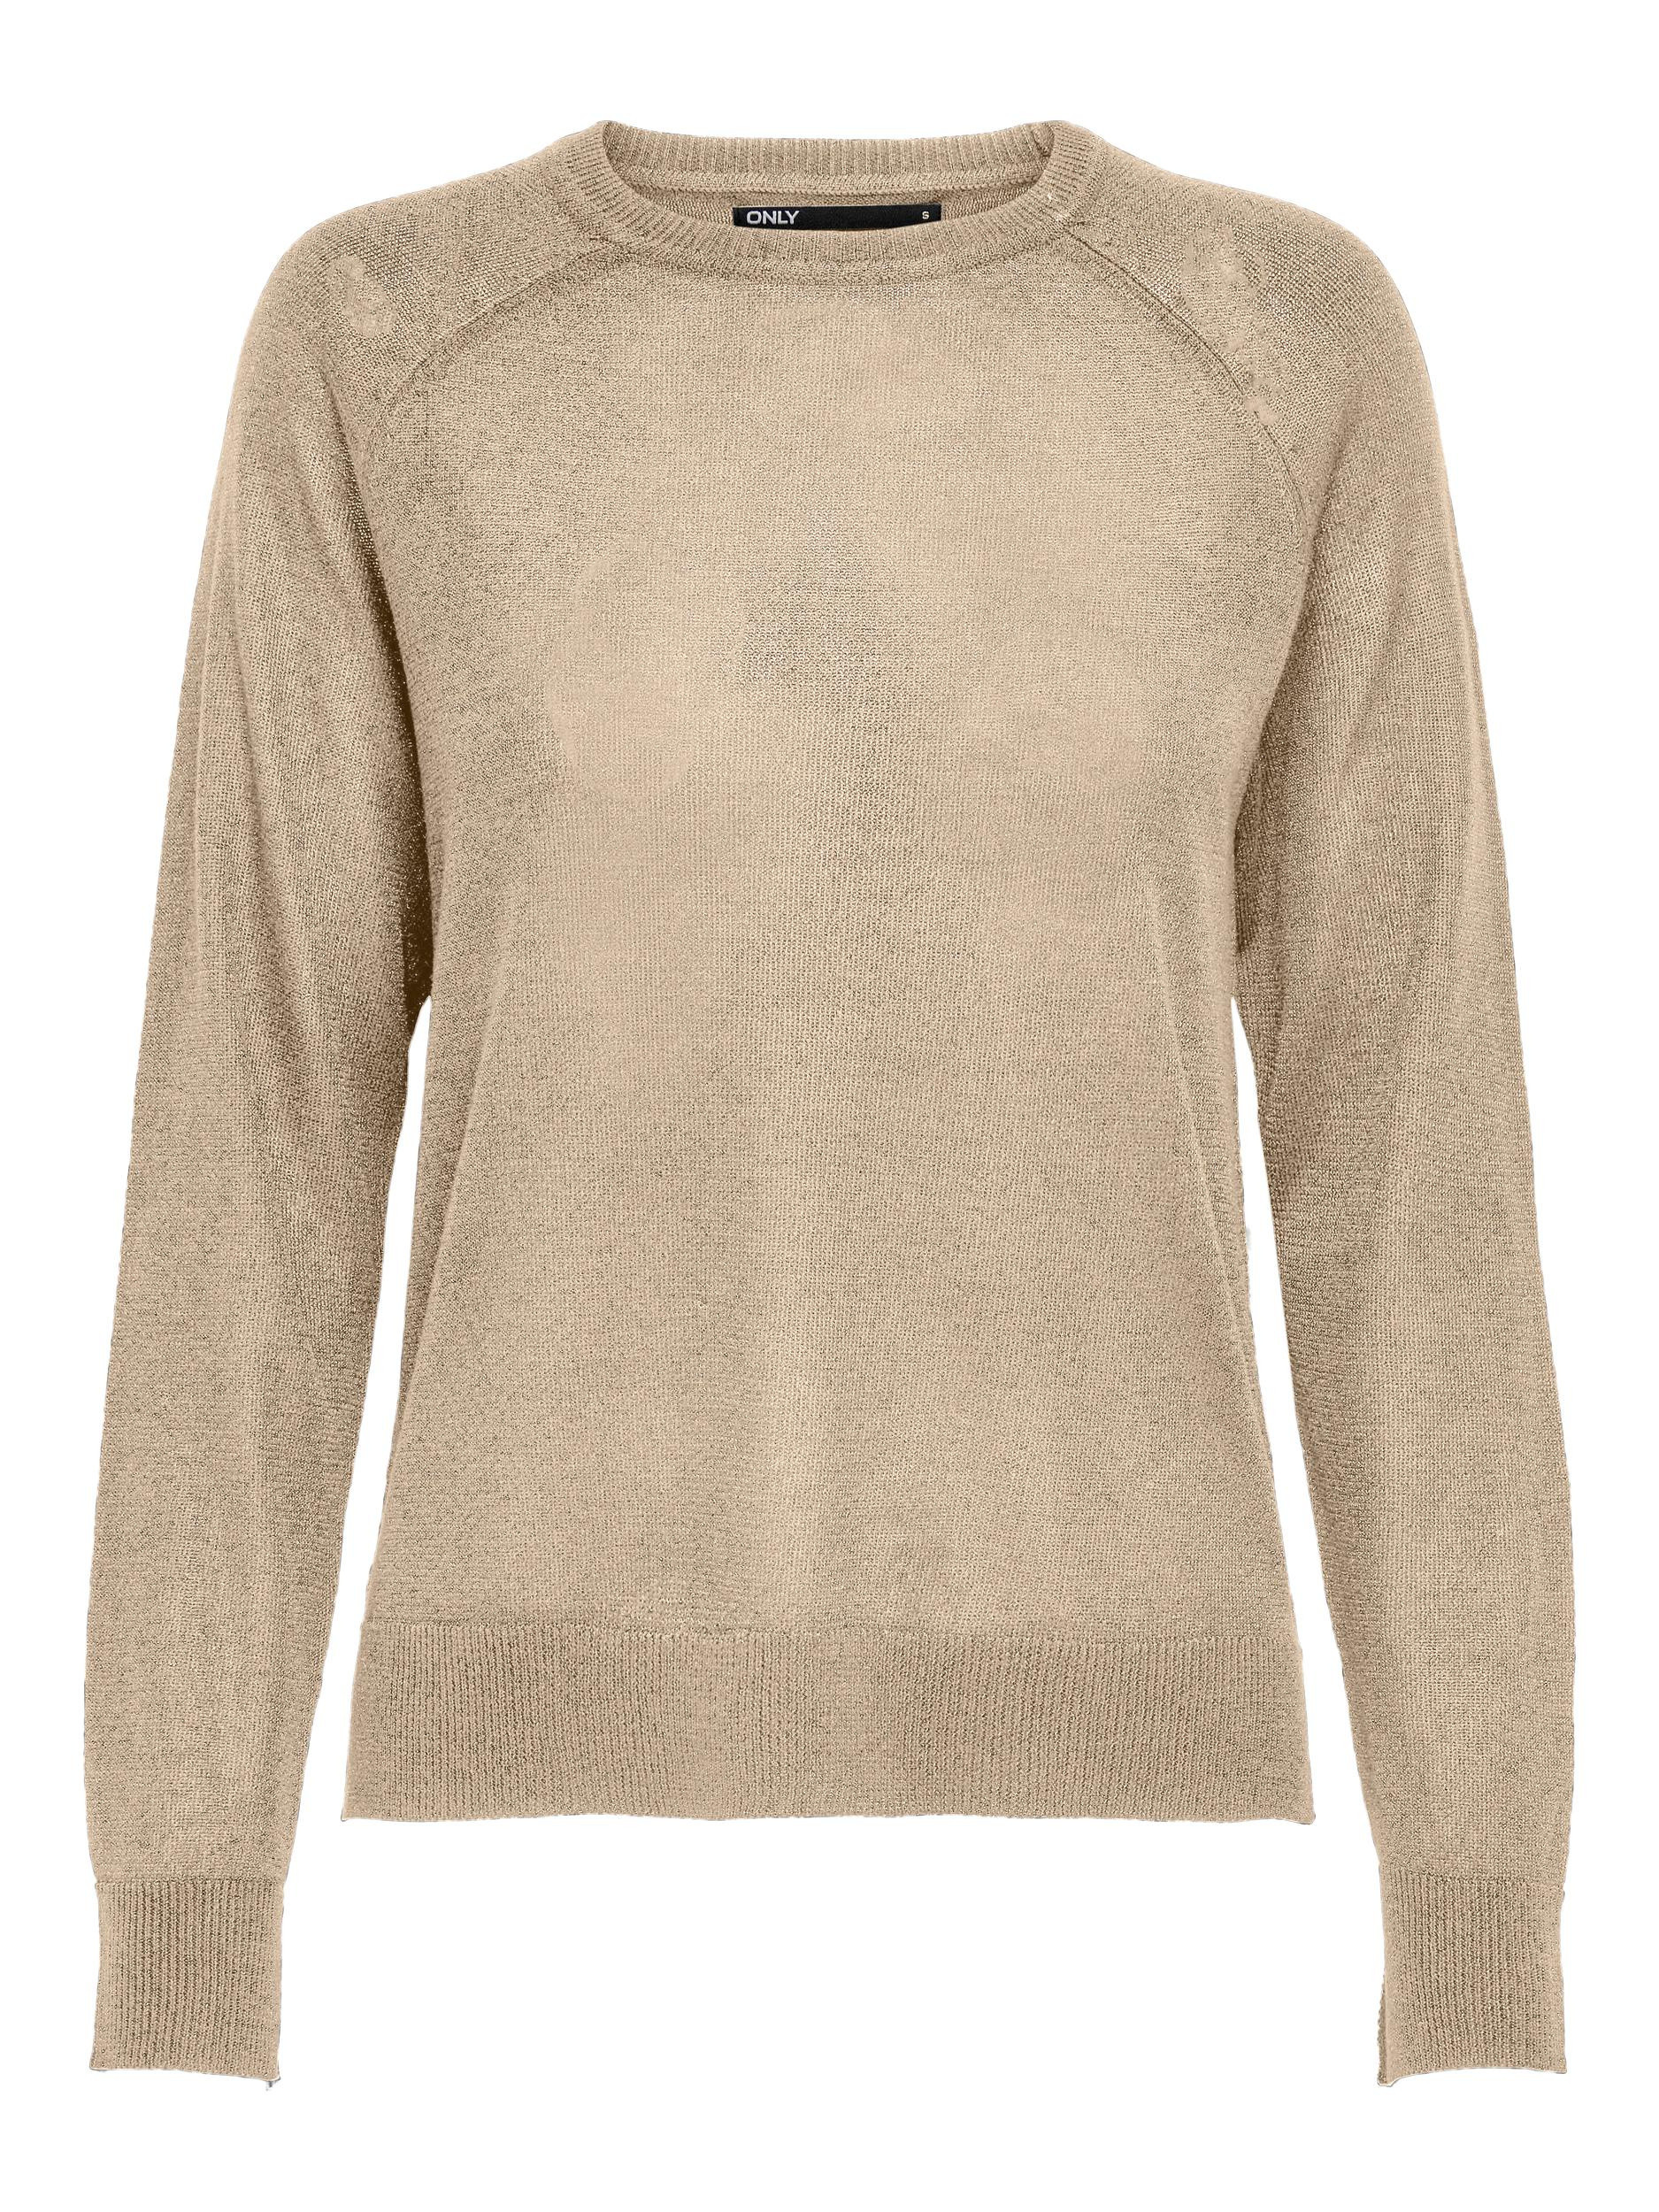 Pullover a girocollo, Beige, large